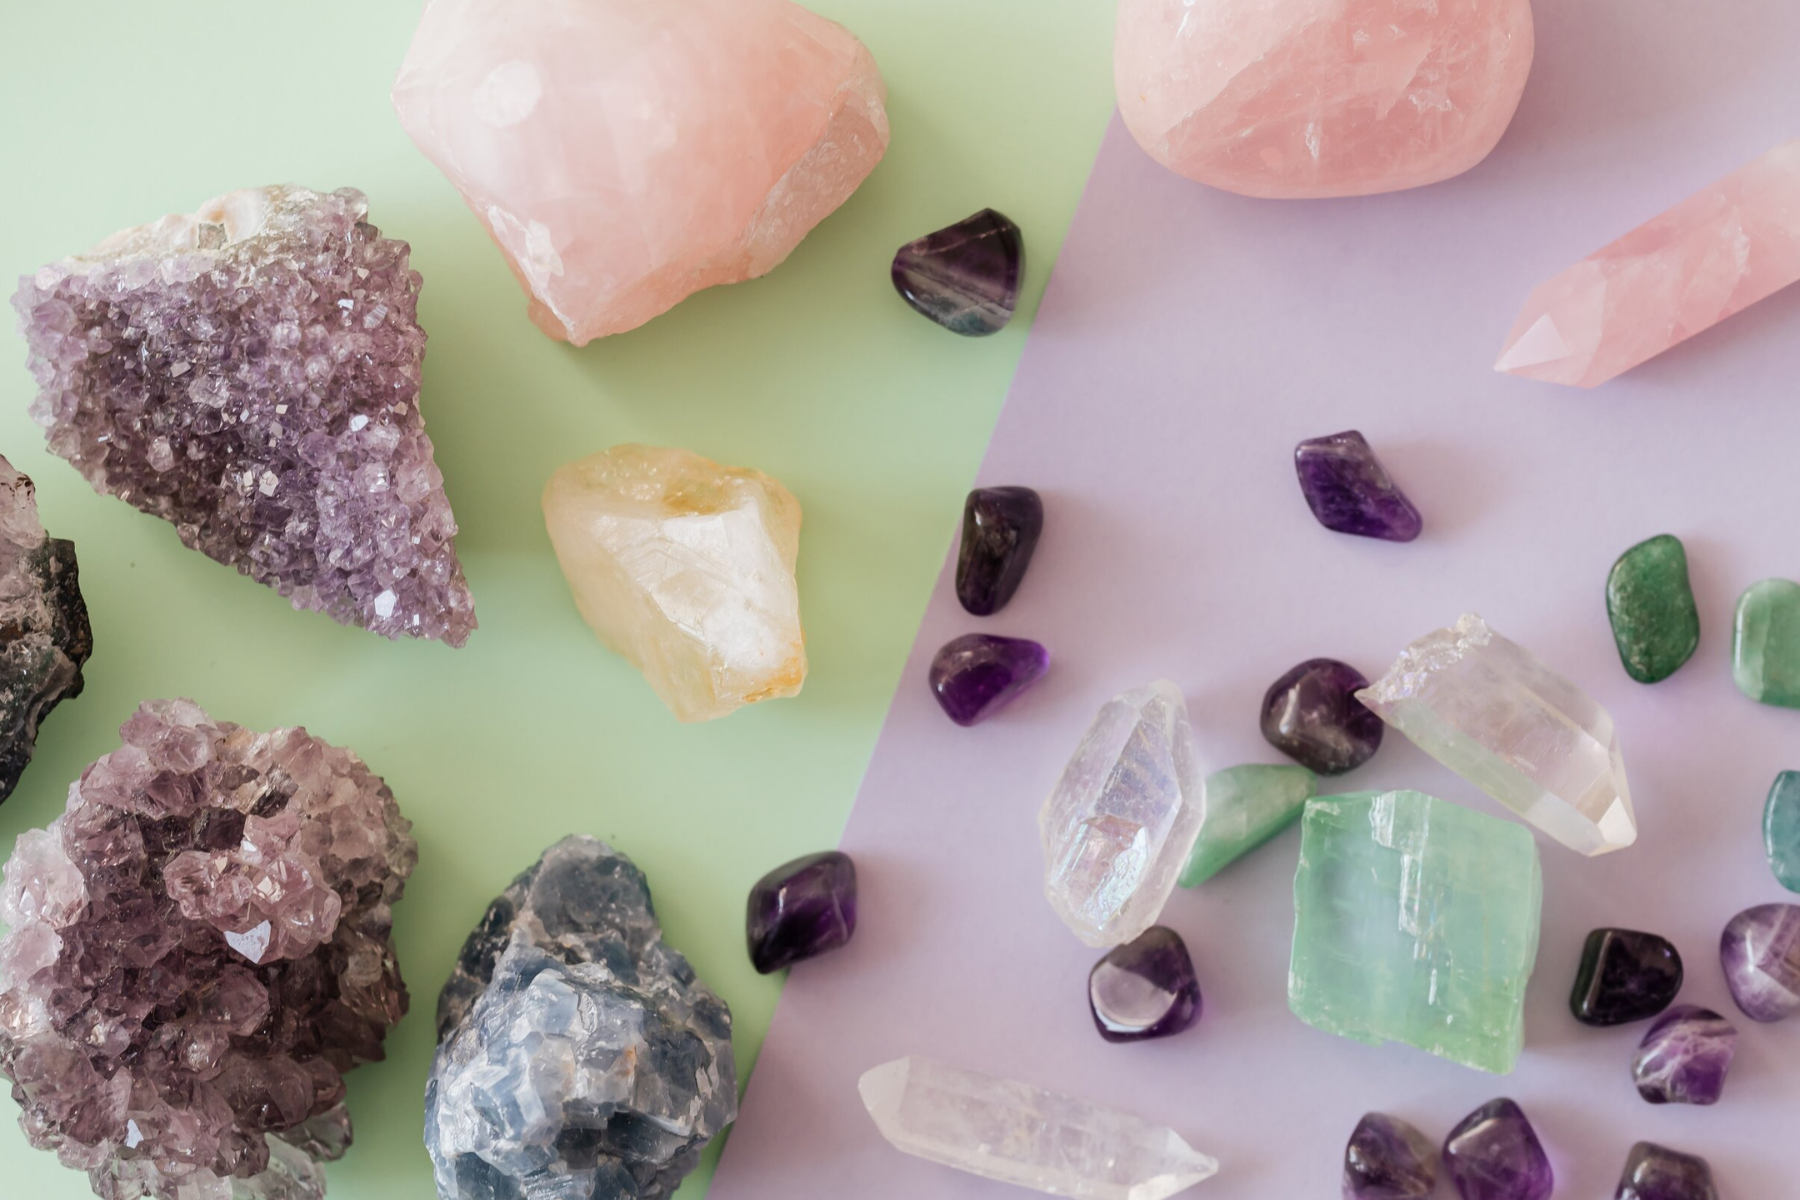 Gemstones of various types are arranged on a background of green and violet hues